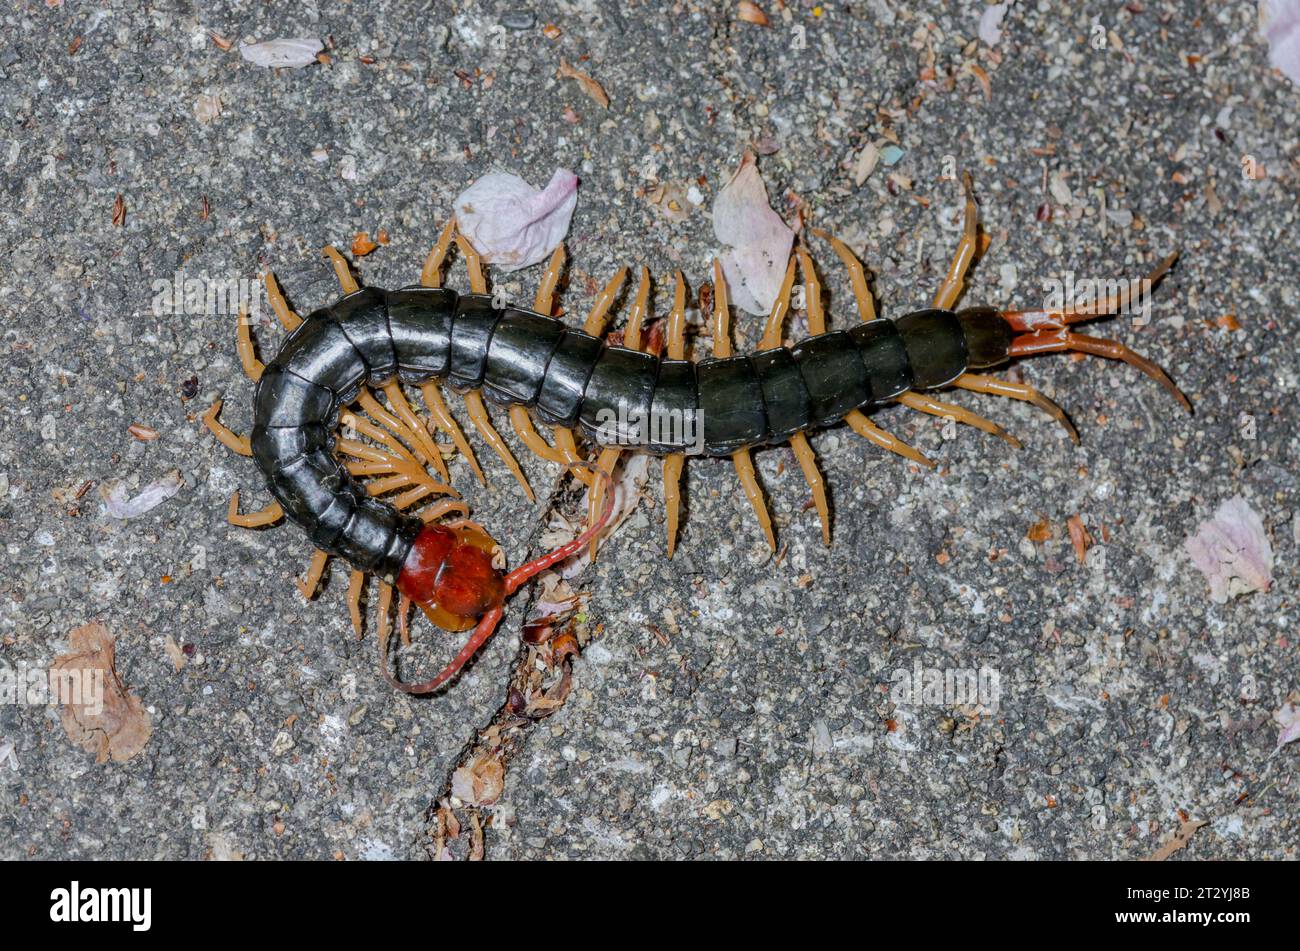 Japanese Giant Centipede (Scolopendra subspinipes mutilans). Kobe, Japan Stock Photo